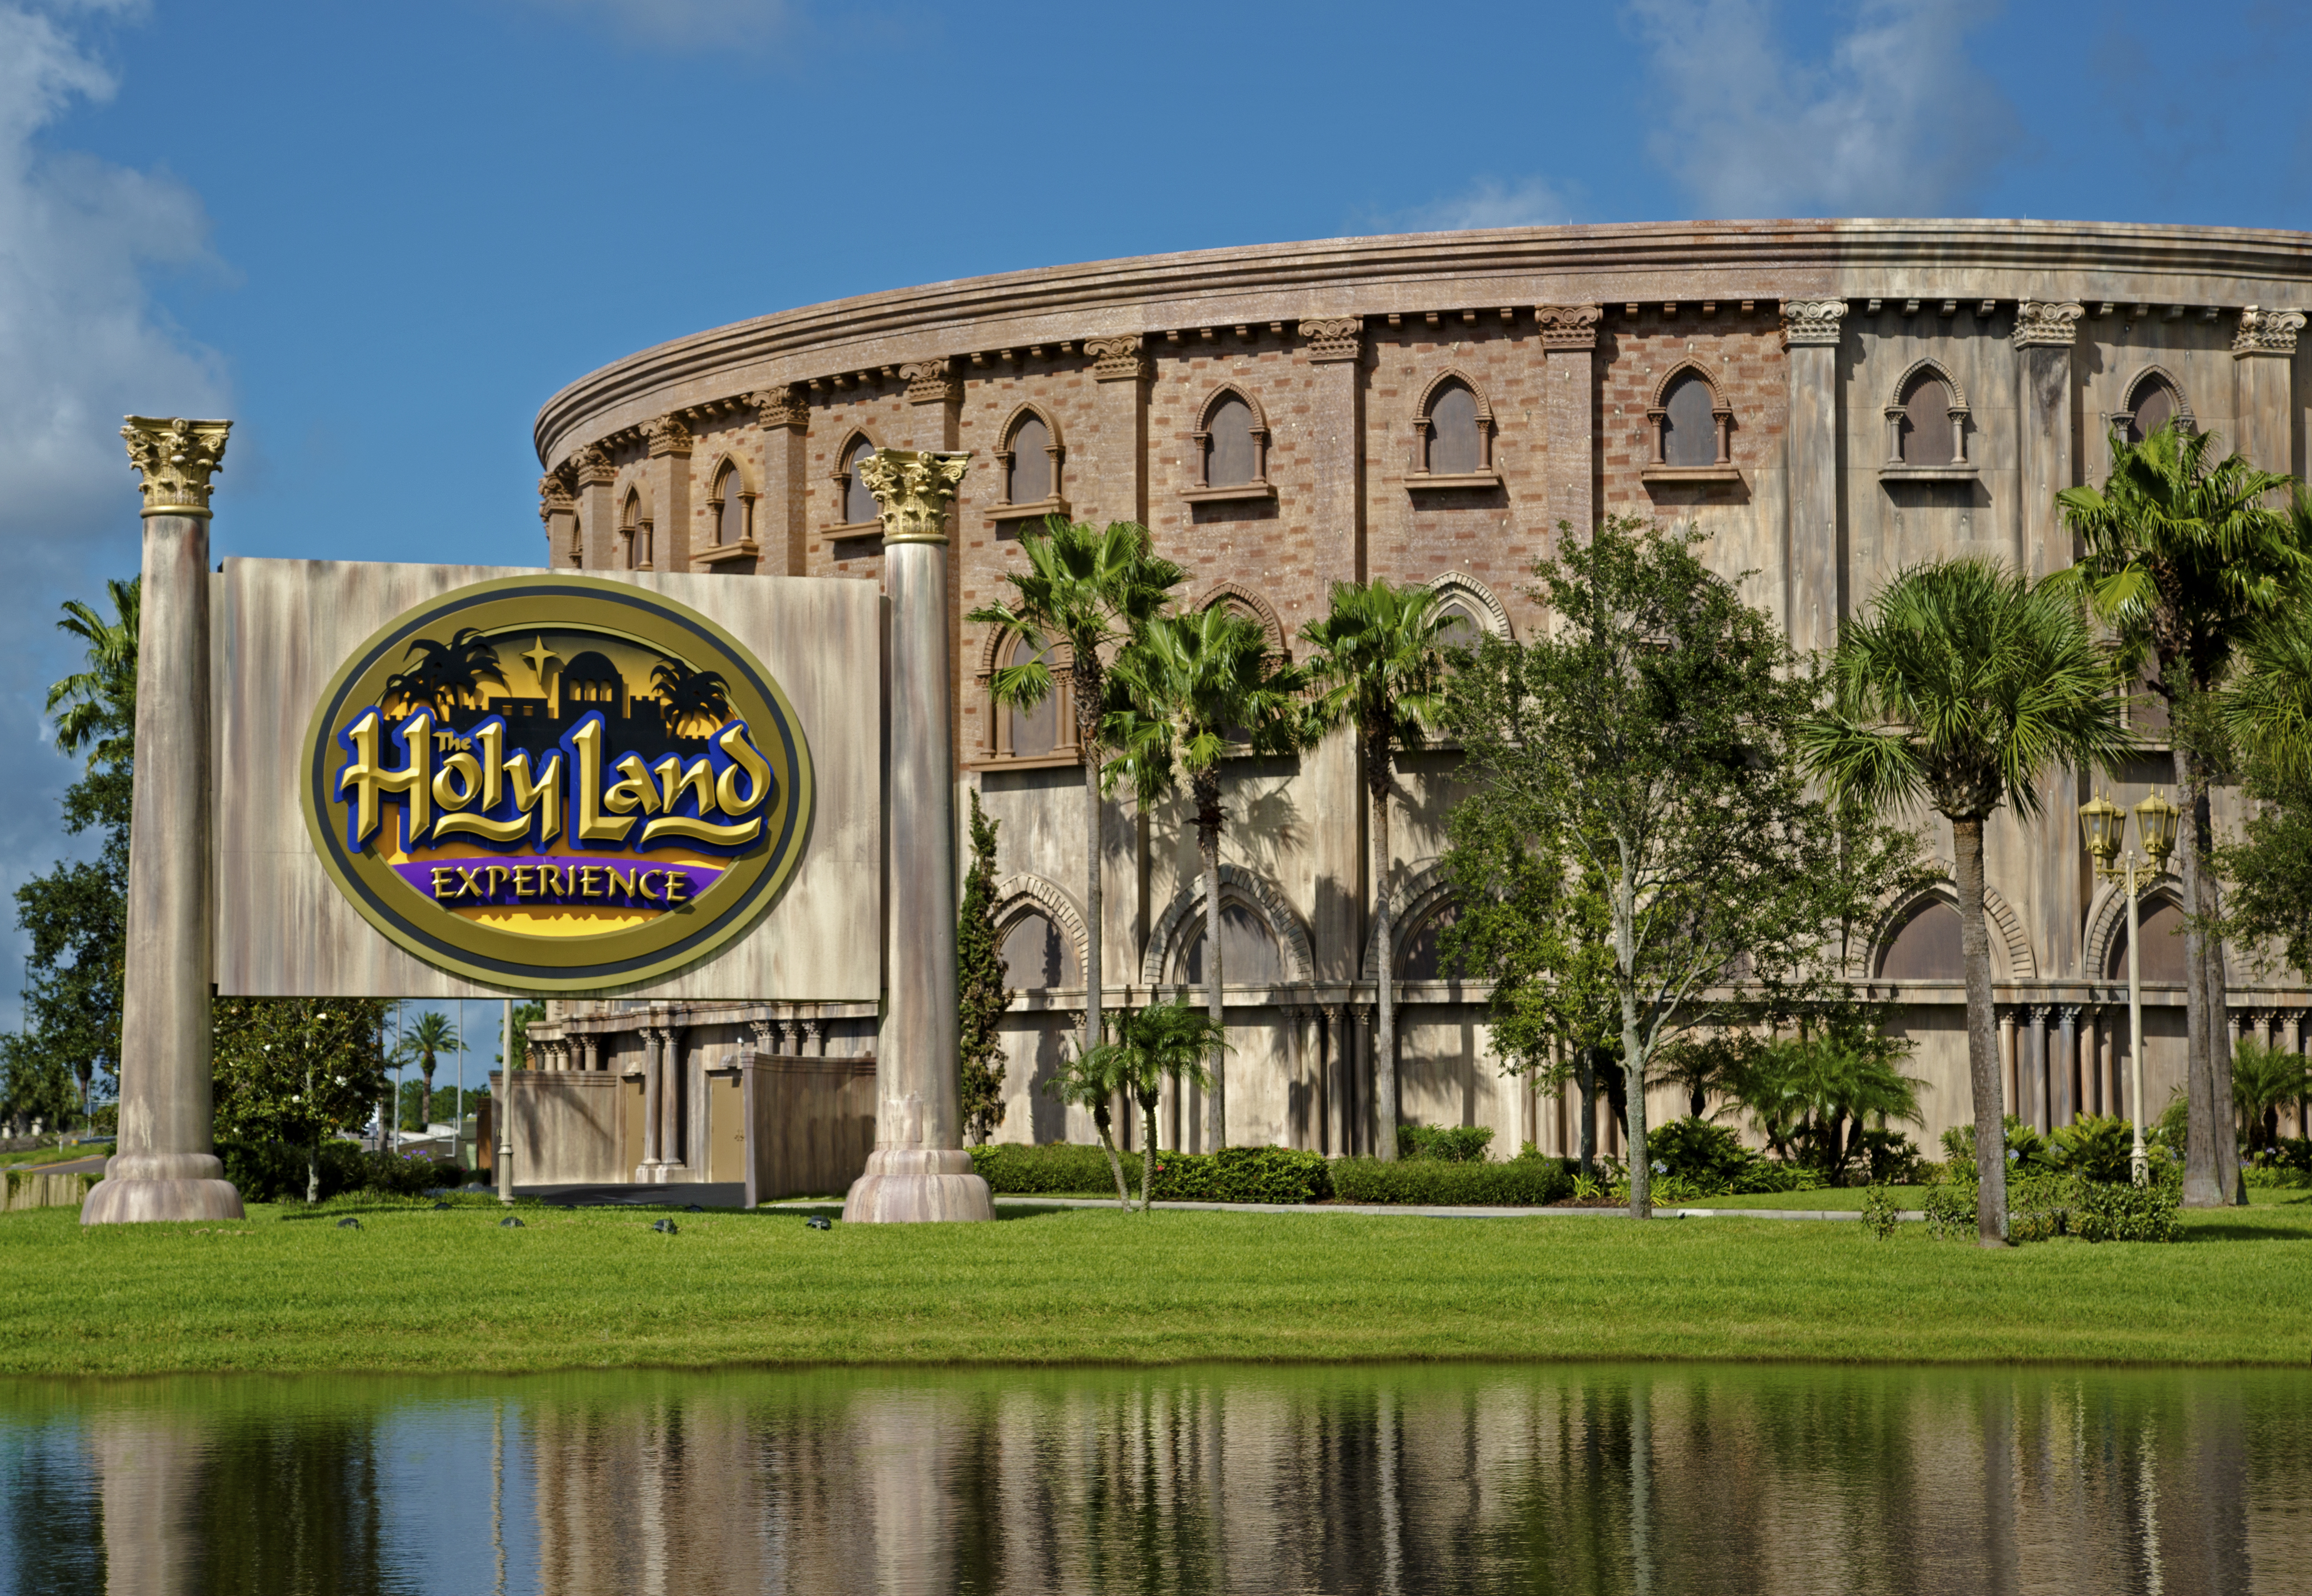 holy-land-experience